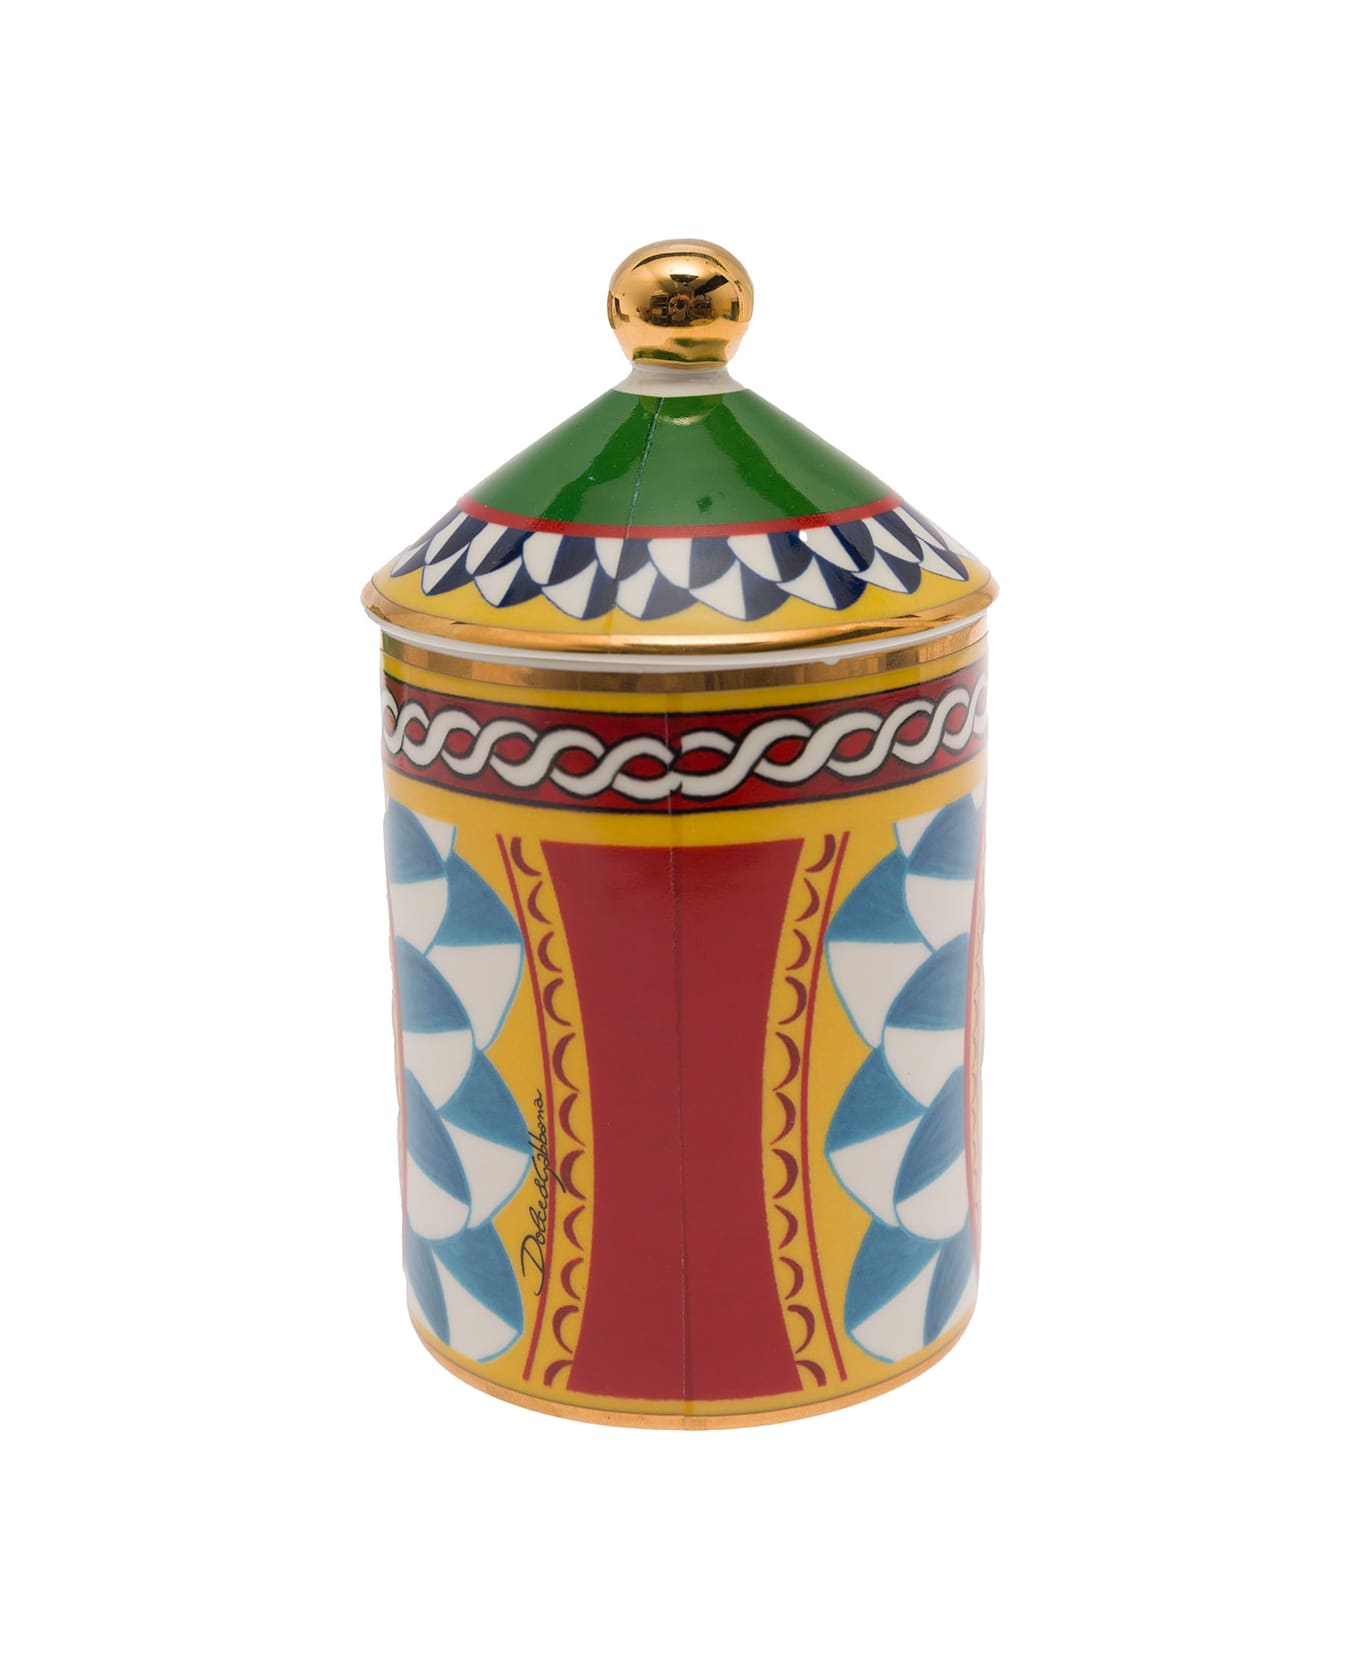 Dolce & Gabbana Wild Jasmine Scented Candle With Lid And Carretto Print - Multicolor